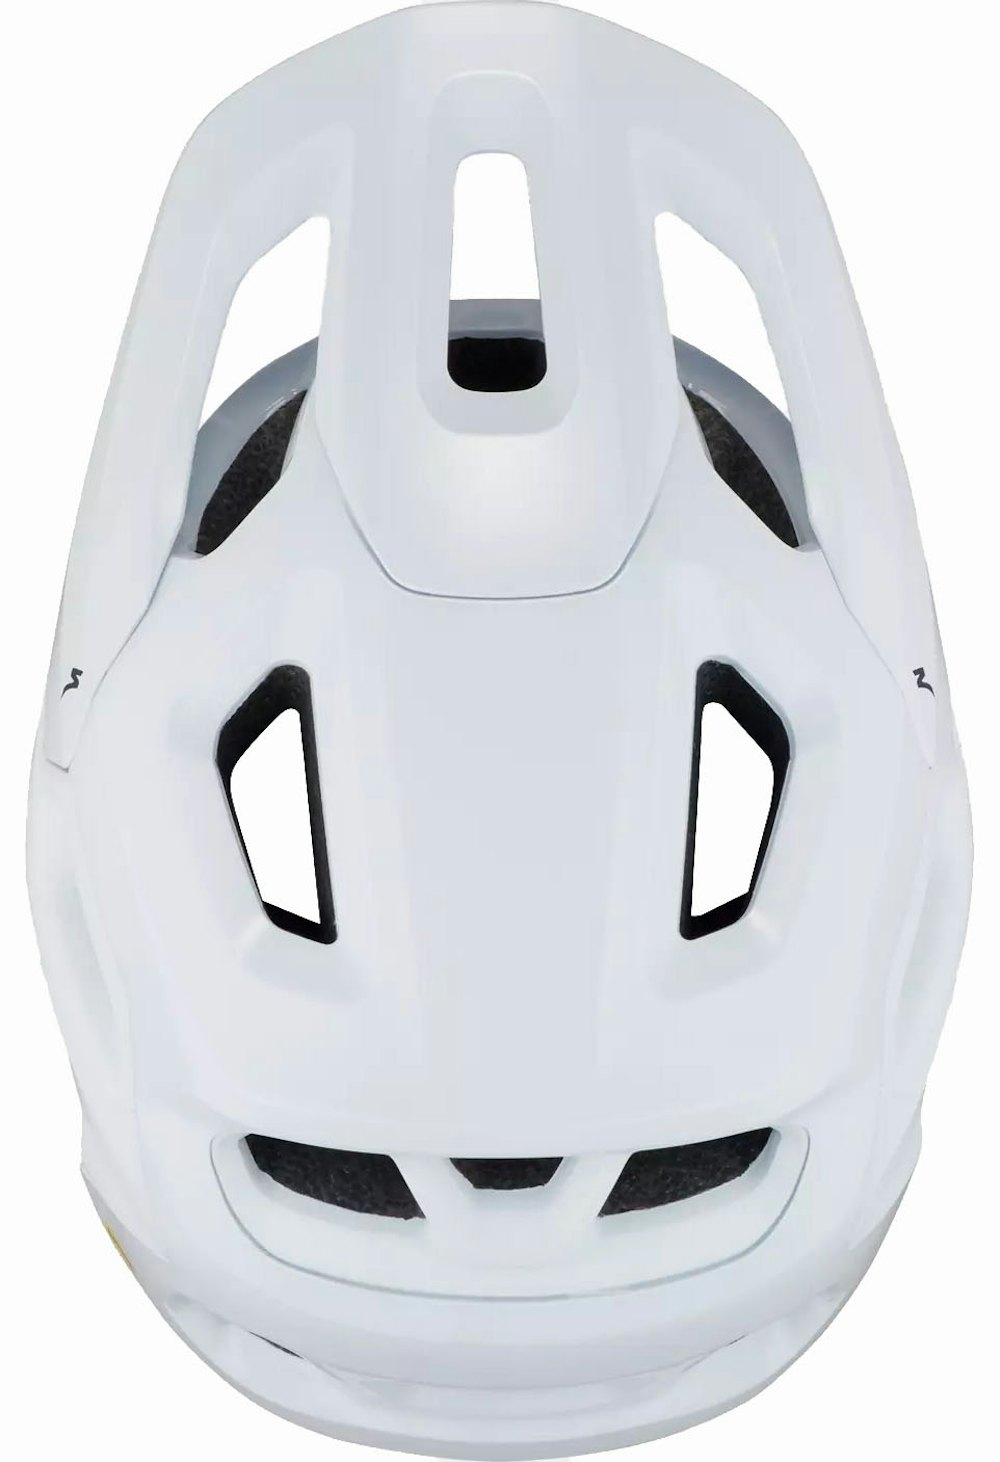 SPECIALIZED TACTIC 4 HELMET CPSC ROUND FIT